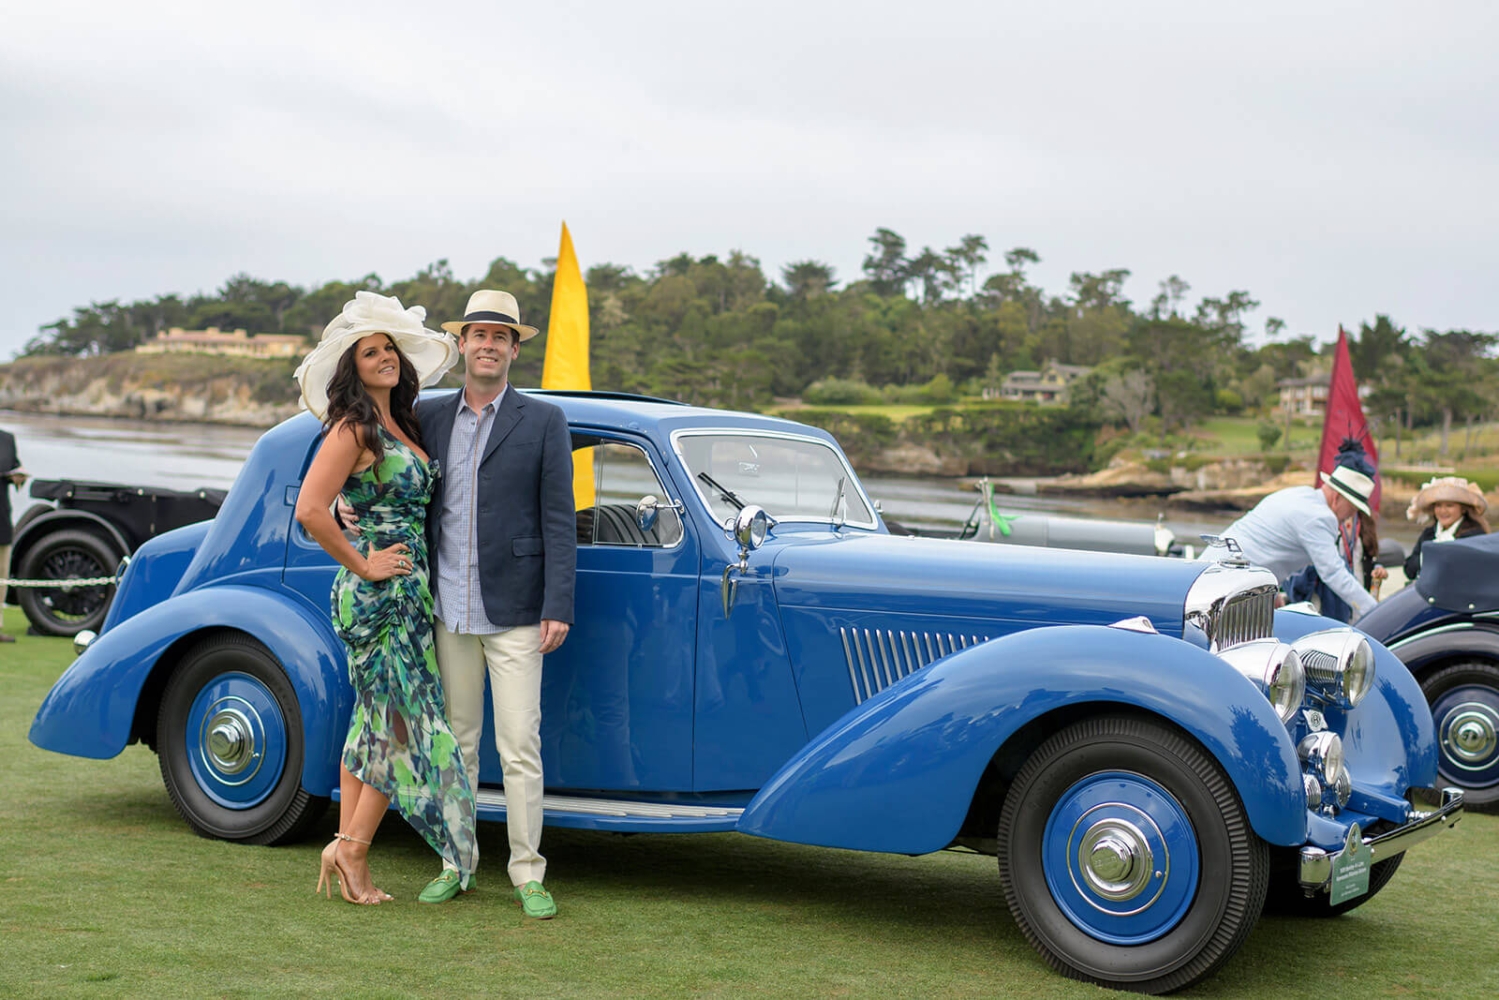 Concours Style at the Pebble Beach Concours d'Elegance 2019